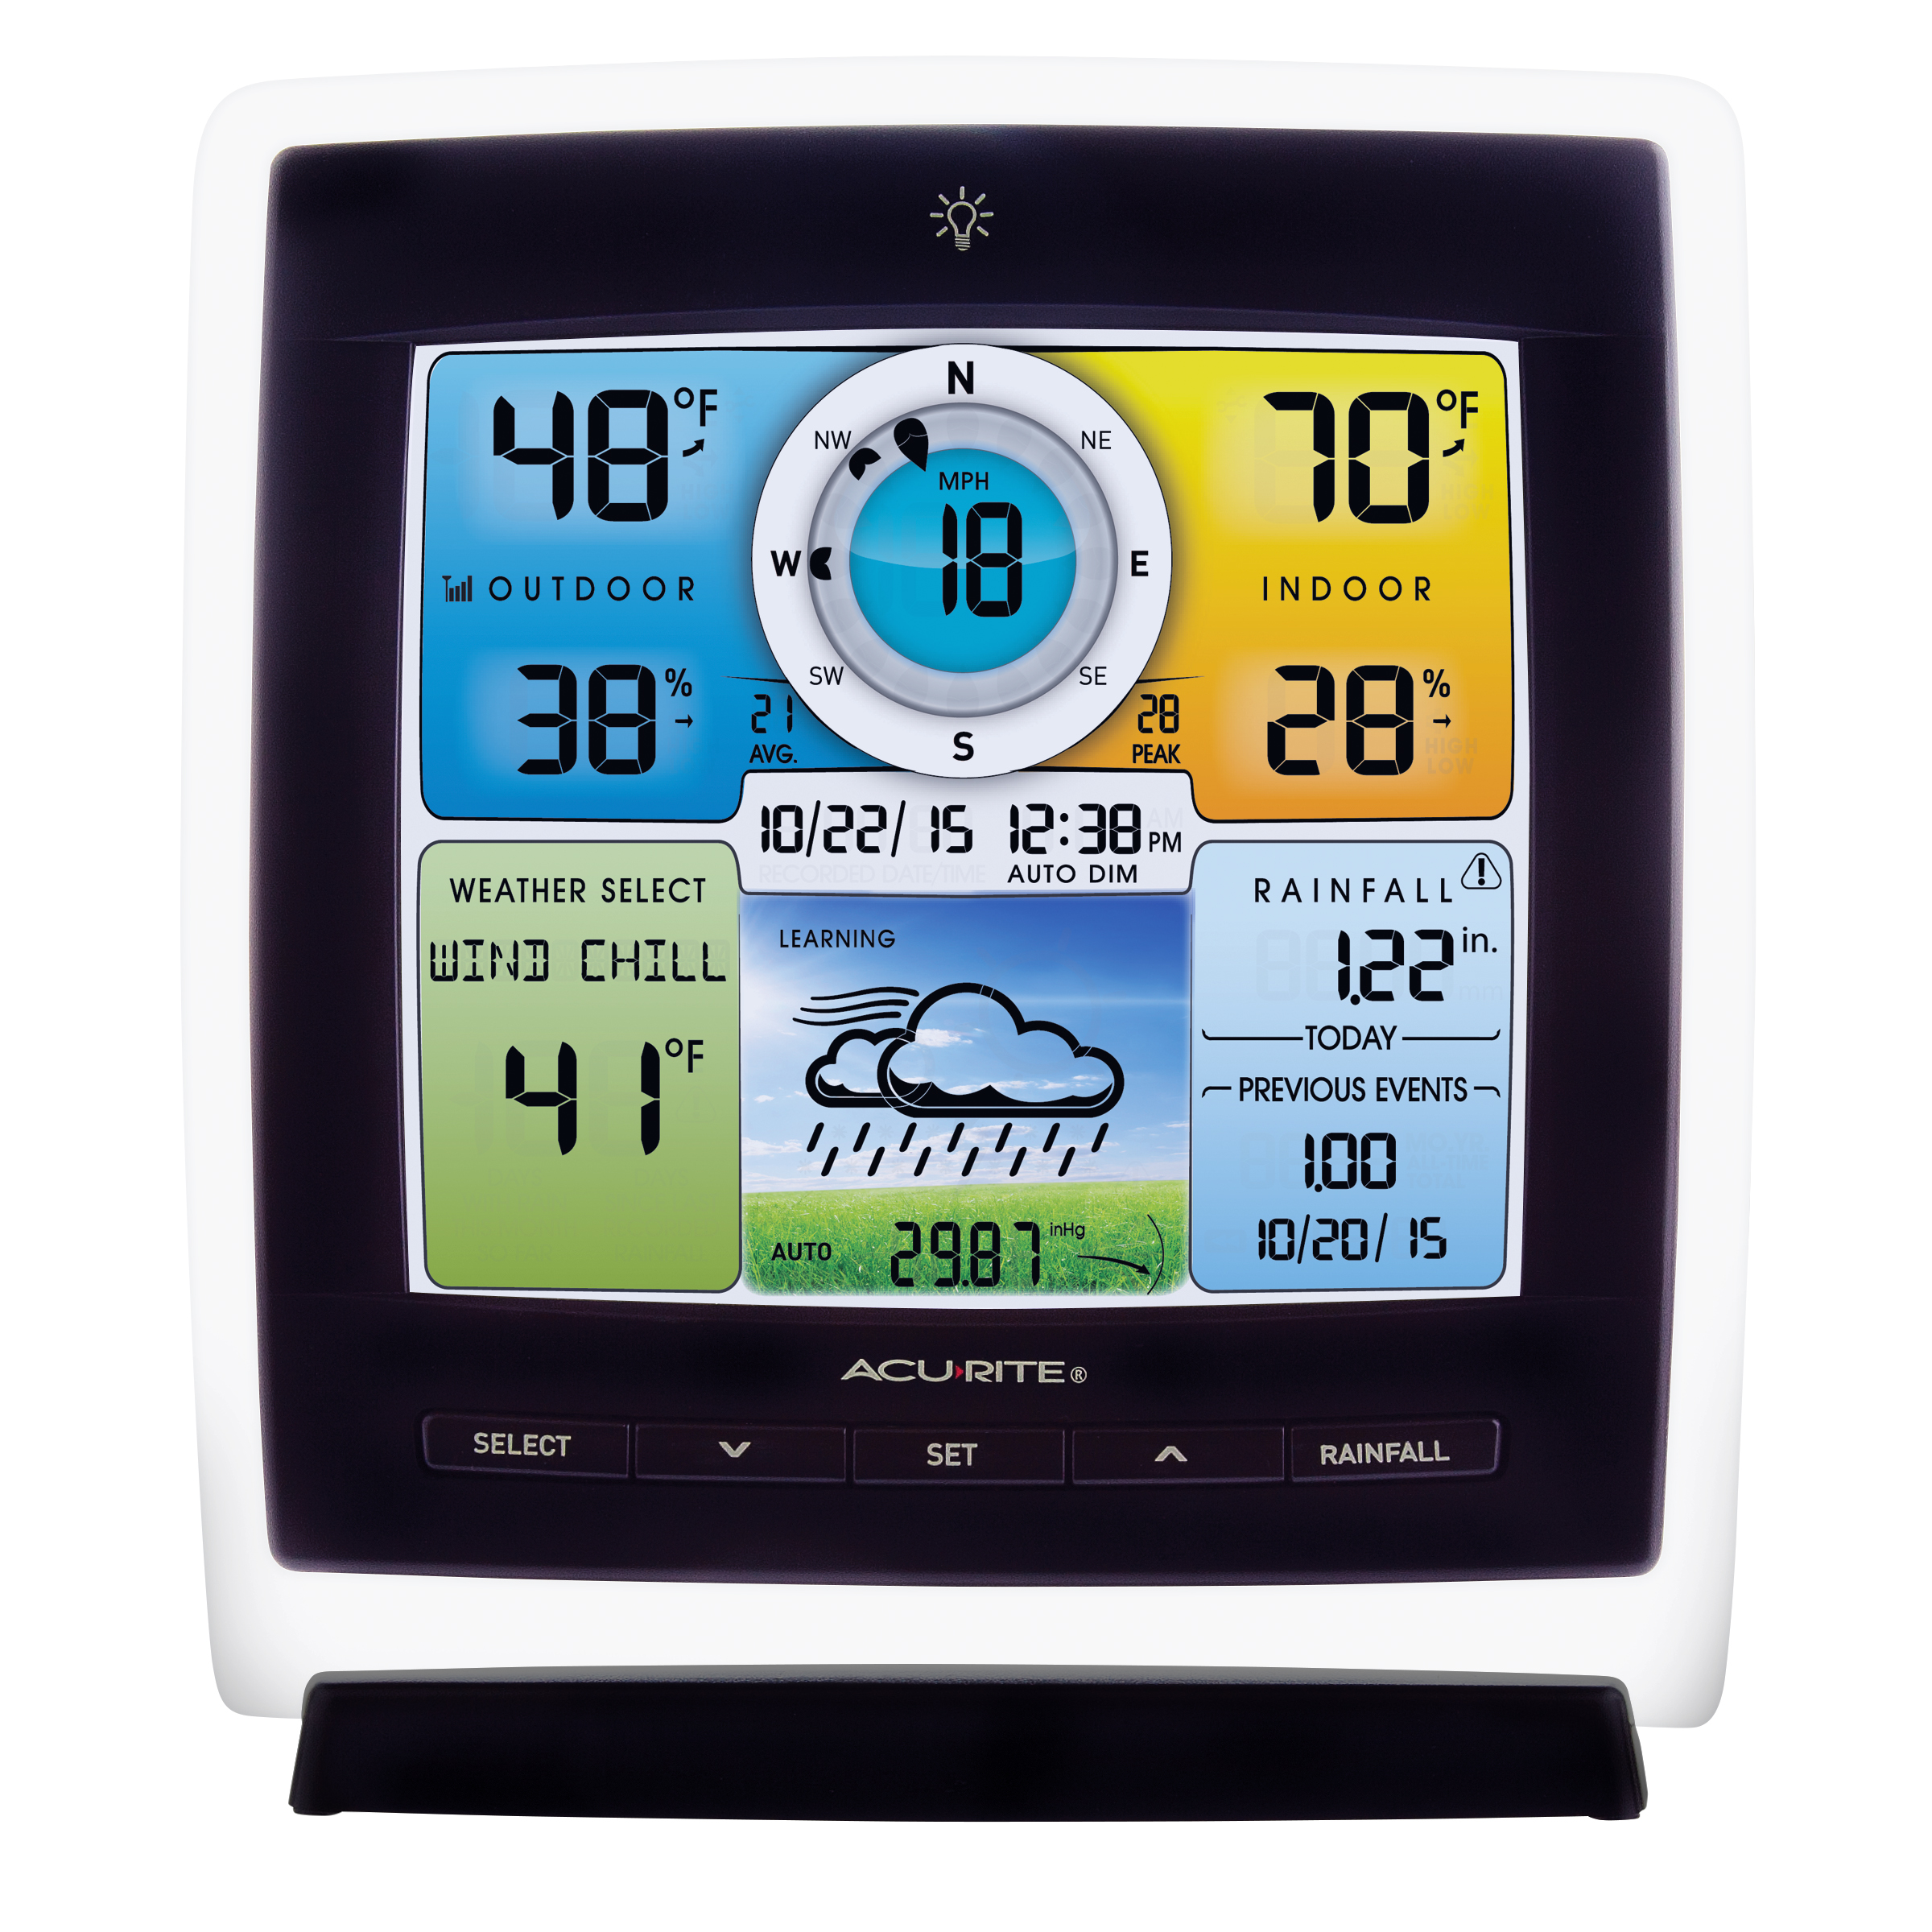 AcuRite 01528 Wireless Weather Station with 5-in-1 Sensor: Temperature and Humidity Gauge, Rain Gauge, Wind Speed and Wind Direction - image 8 of 11